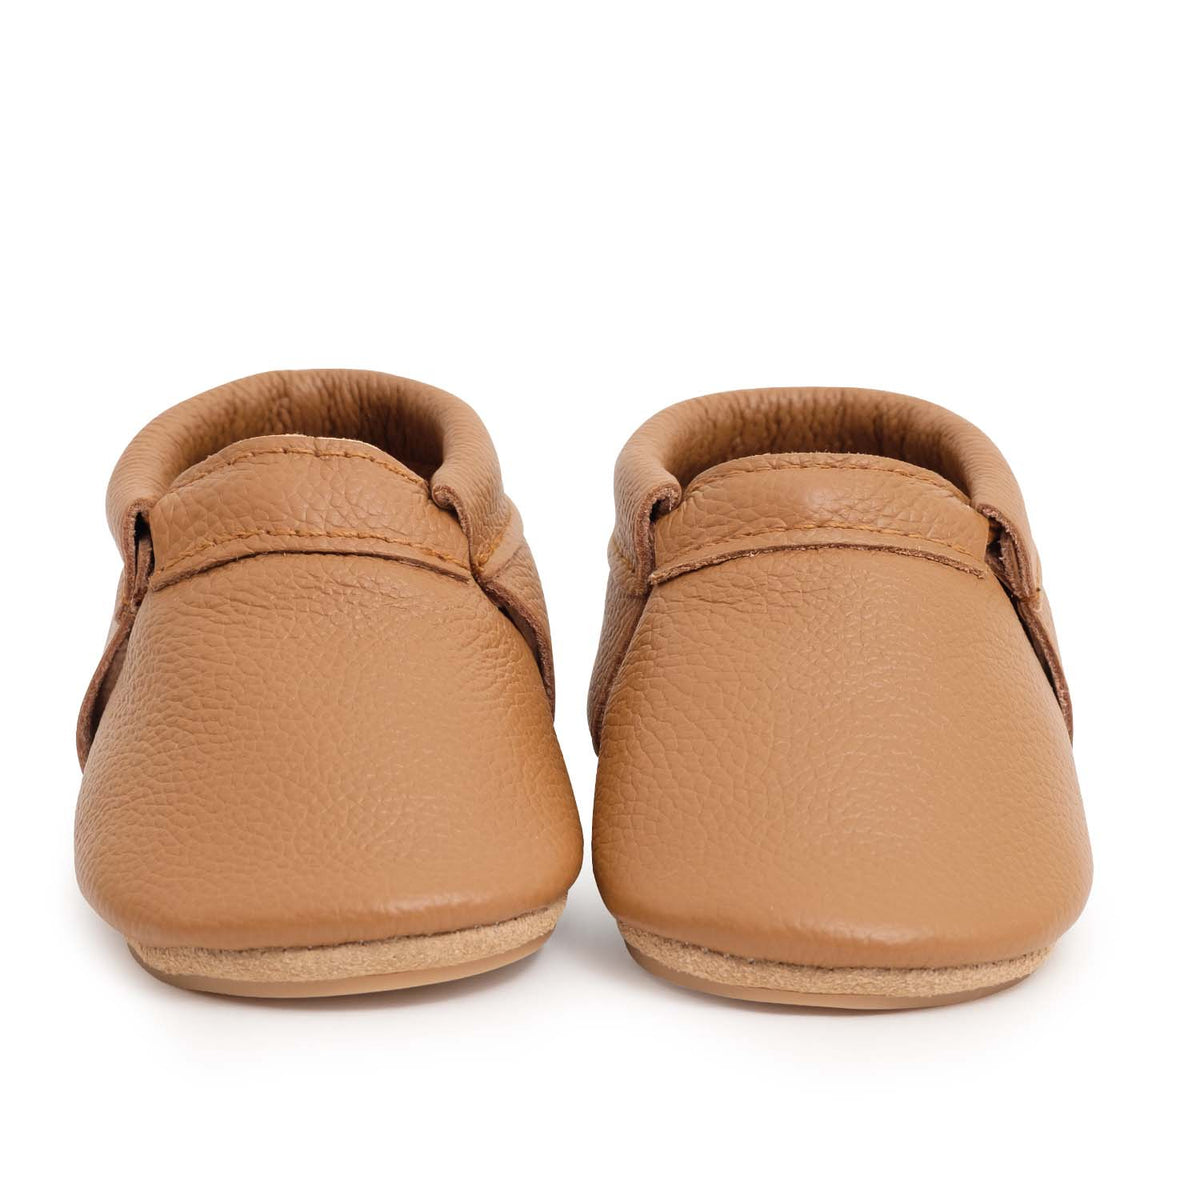 Classic Brown Hard Sole Fringeless Moccasins